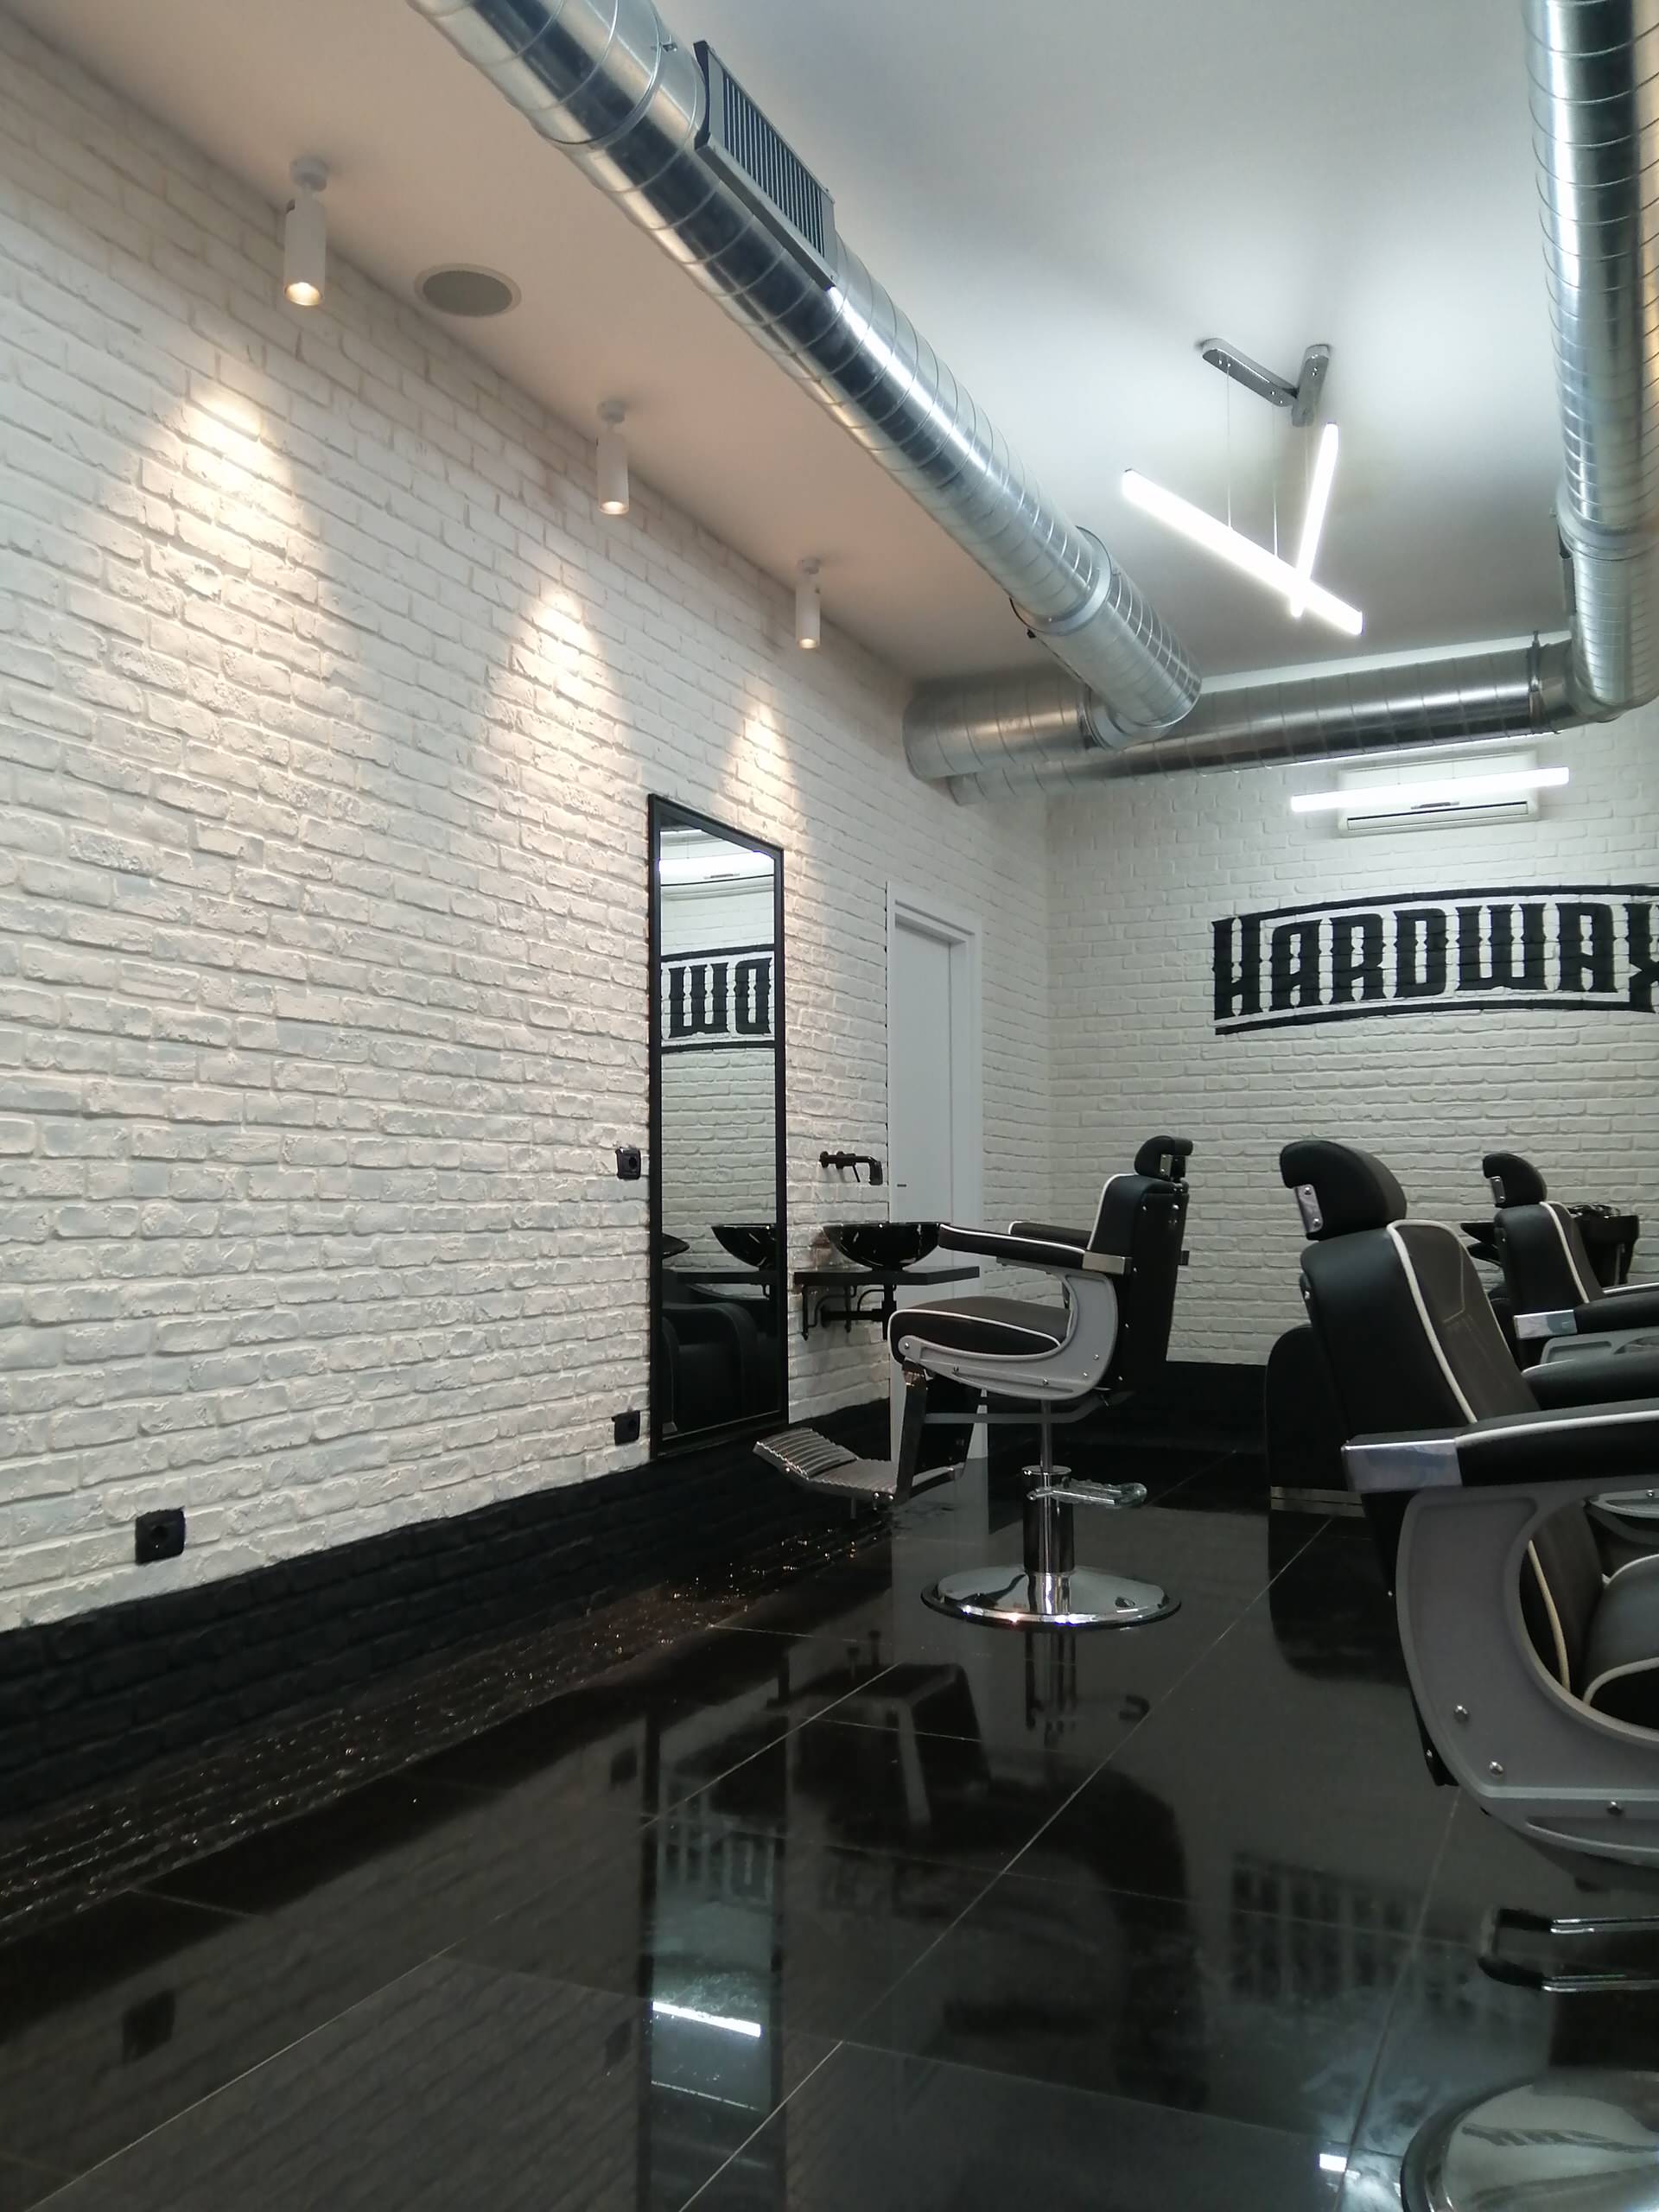 Barber shop industrial style